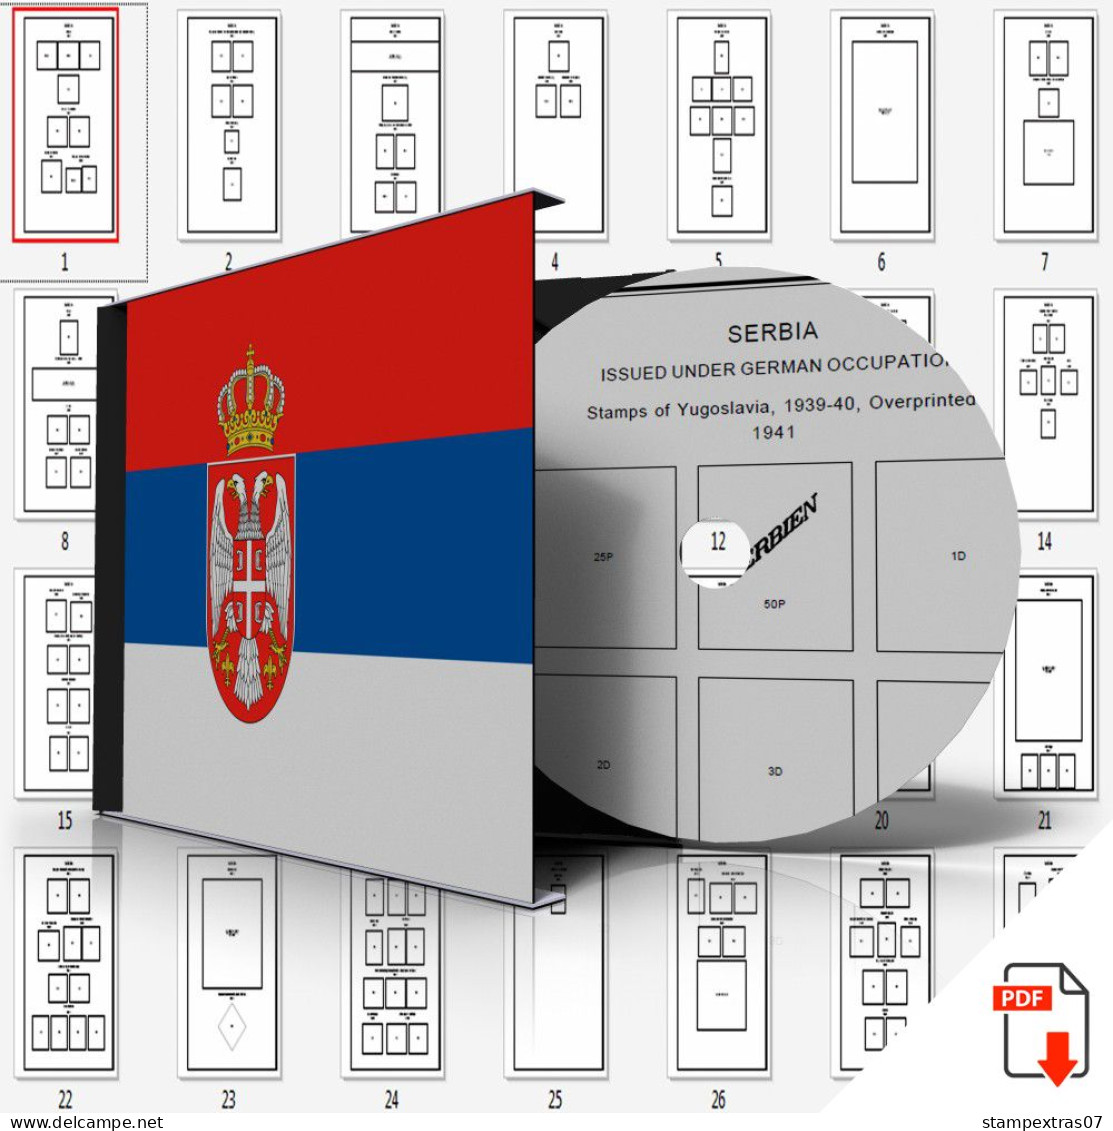 SERBIA STAMP ALBUM PAGES 1866-2011 (101 Pages) - Anglais